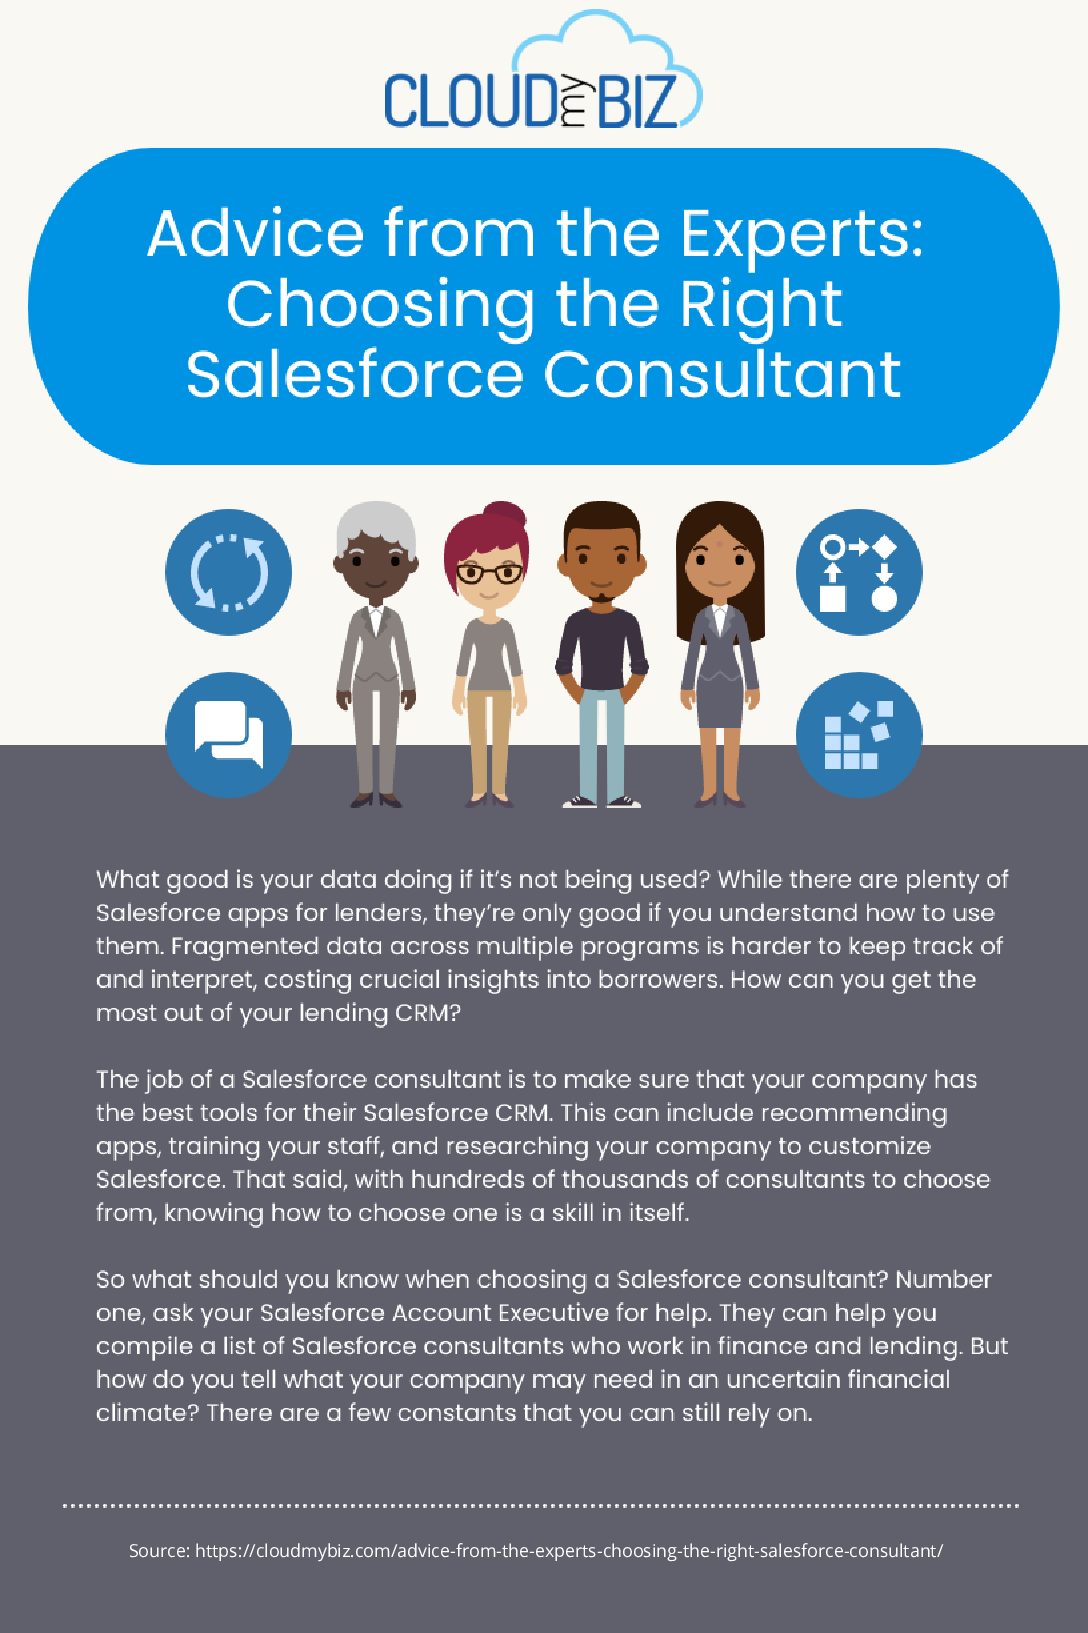 Advice from the Experts: Choosing the Right Salesforce Consultant